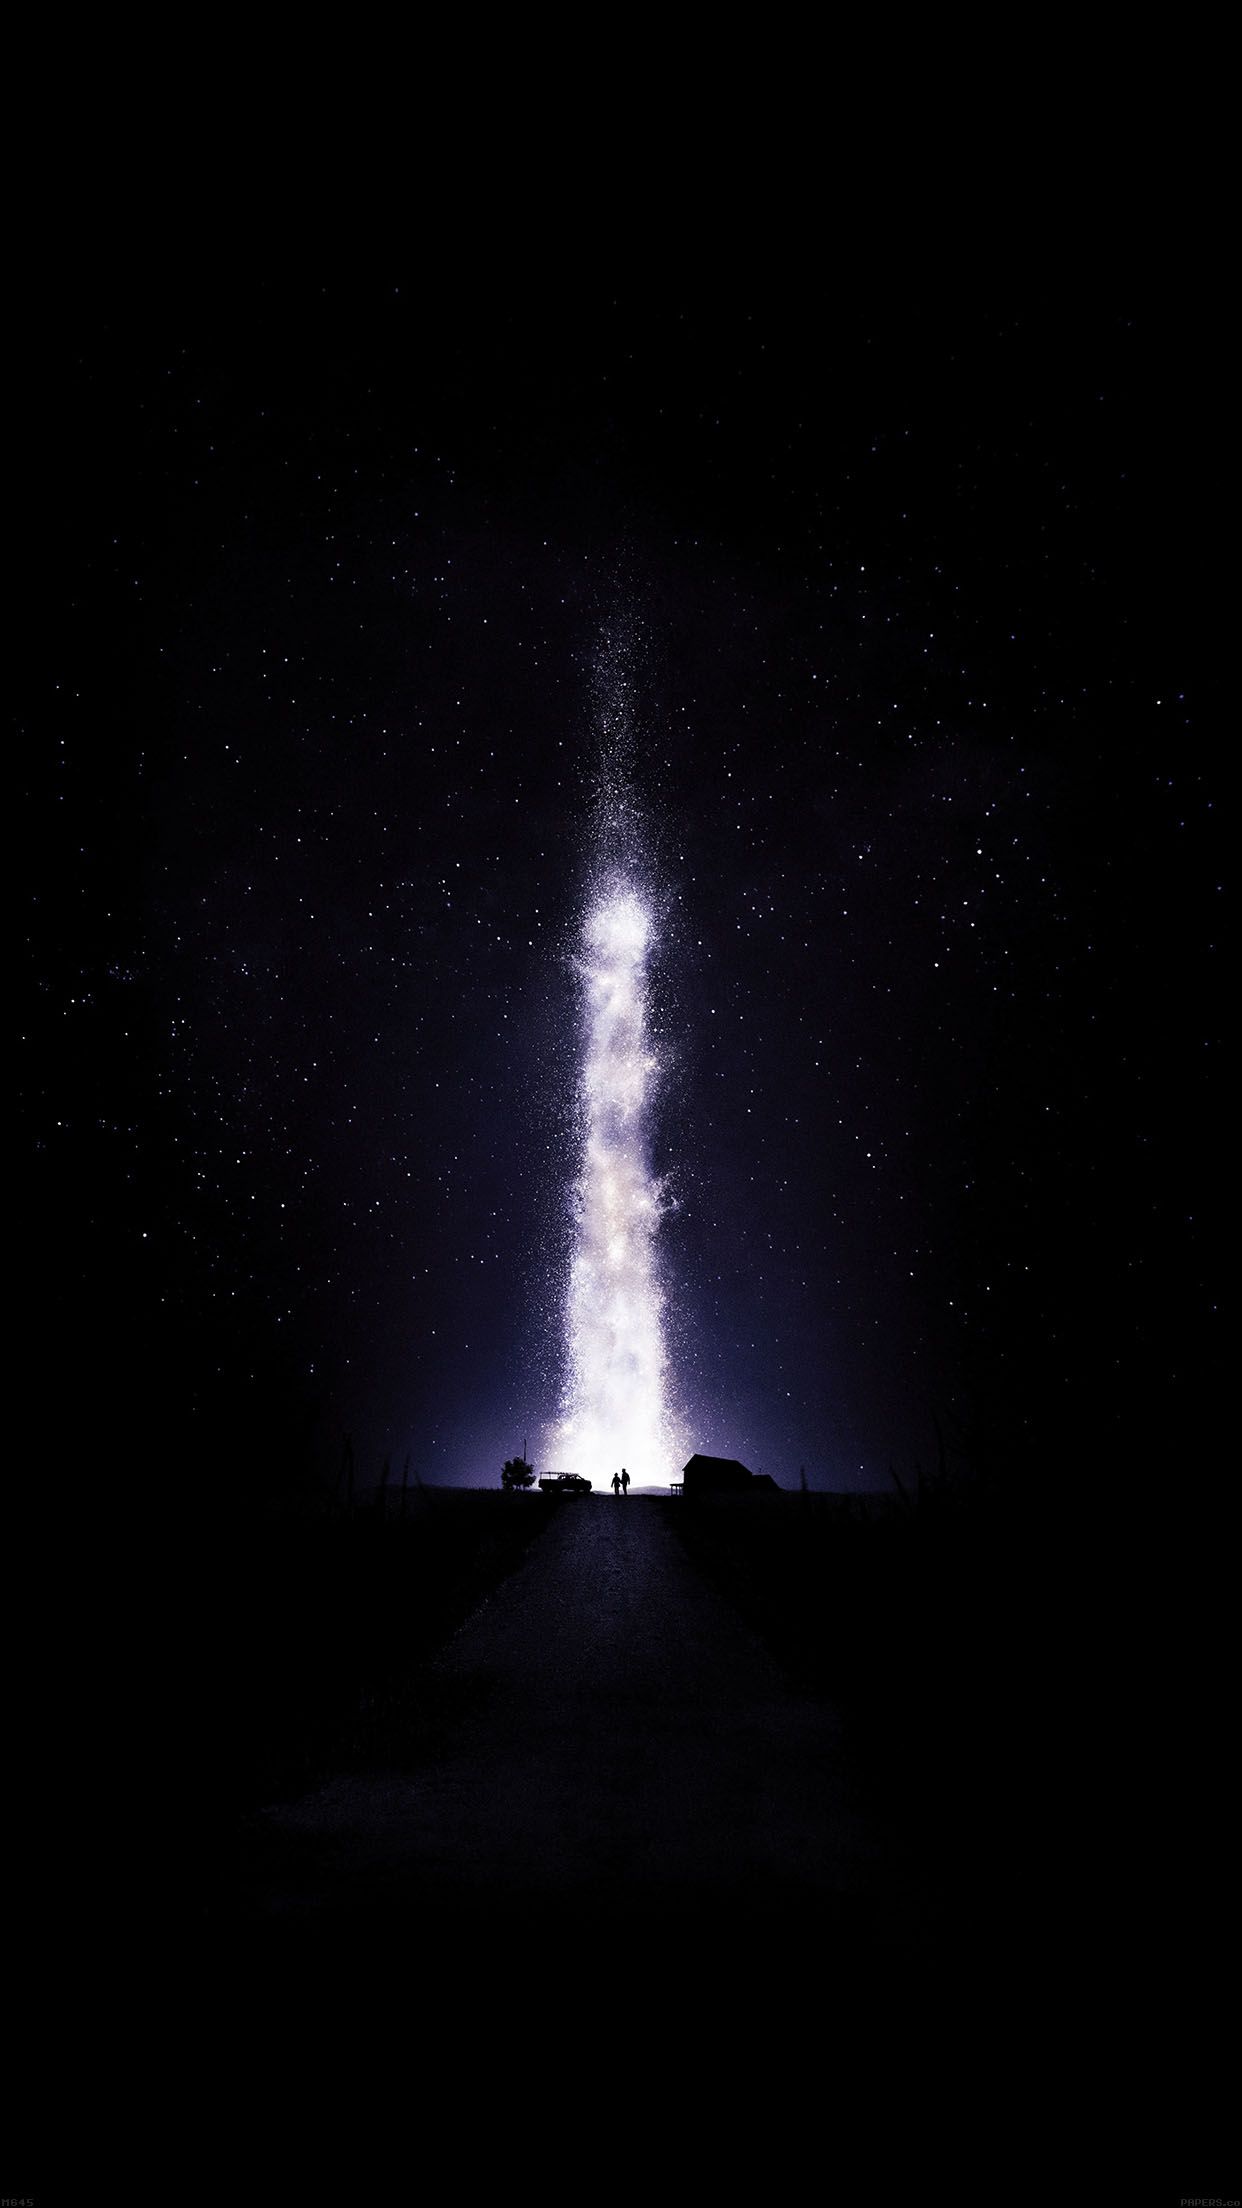 Interstellar Android Wallpapers - Wallpaper Cave